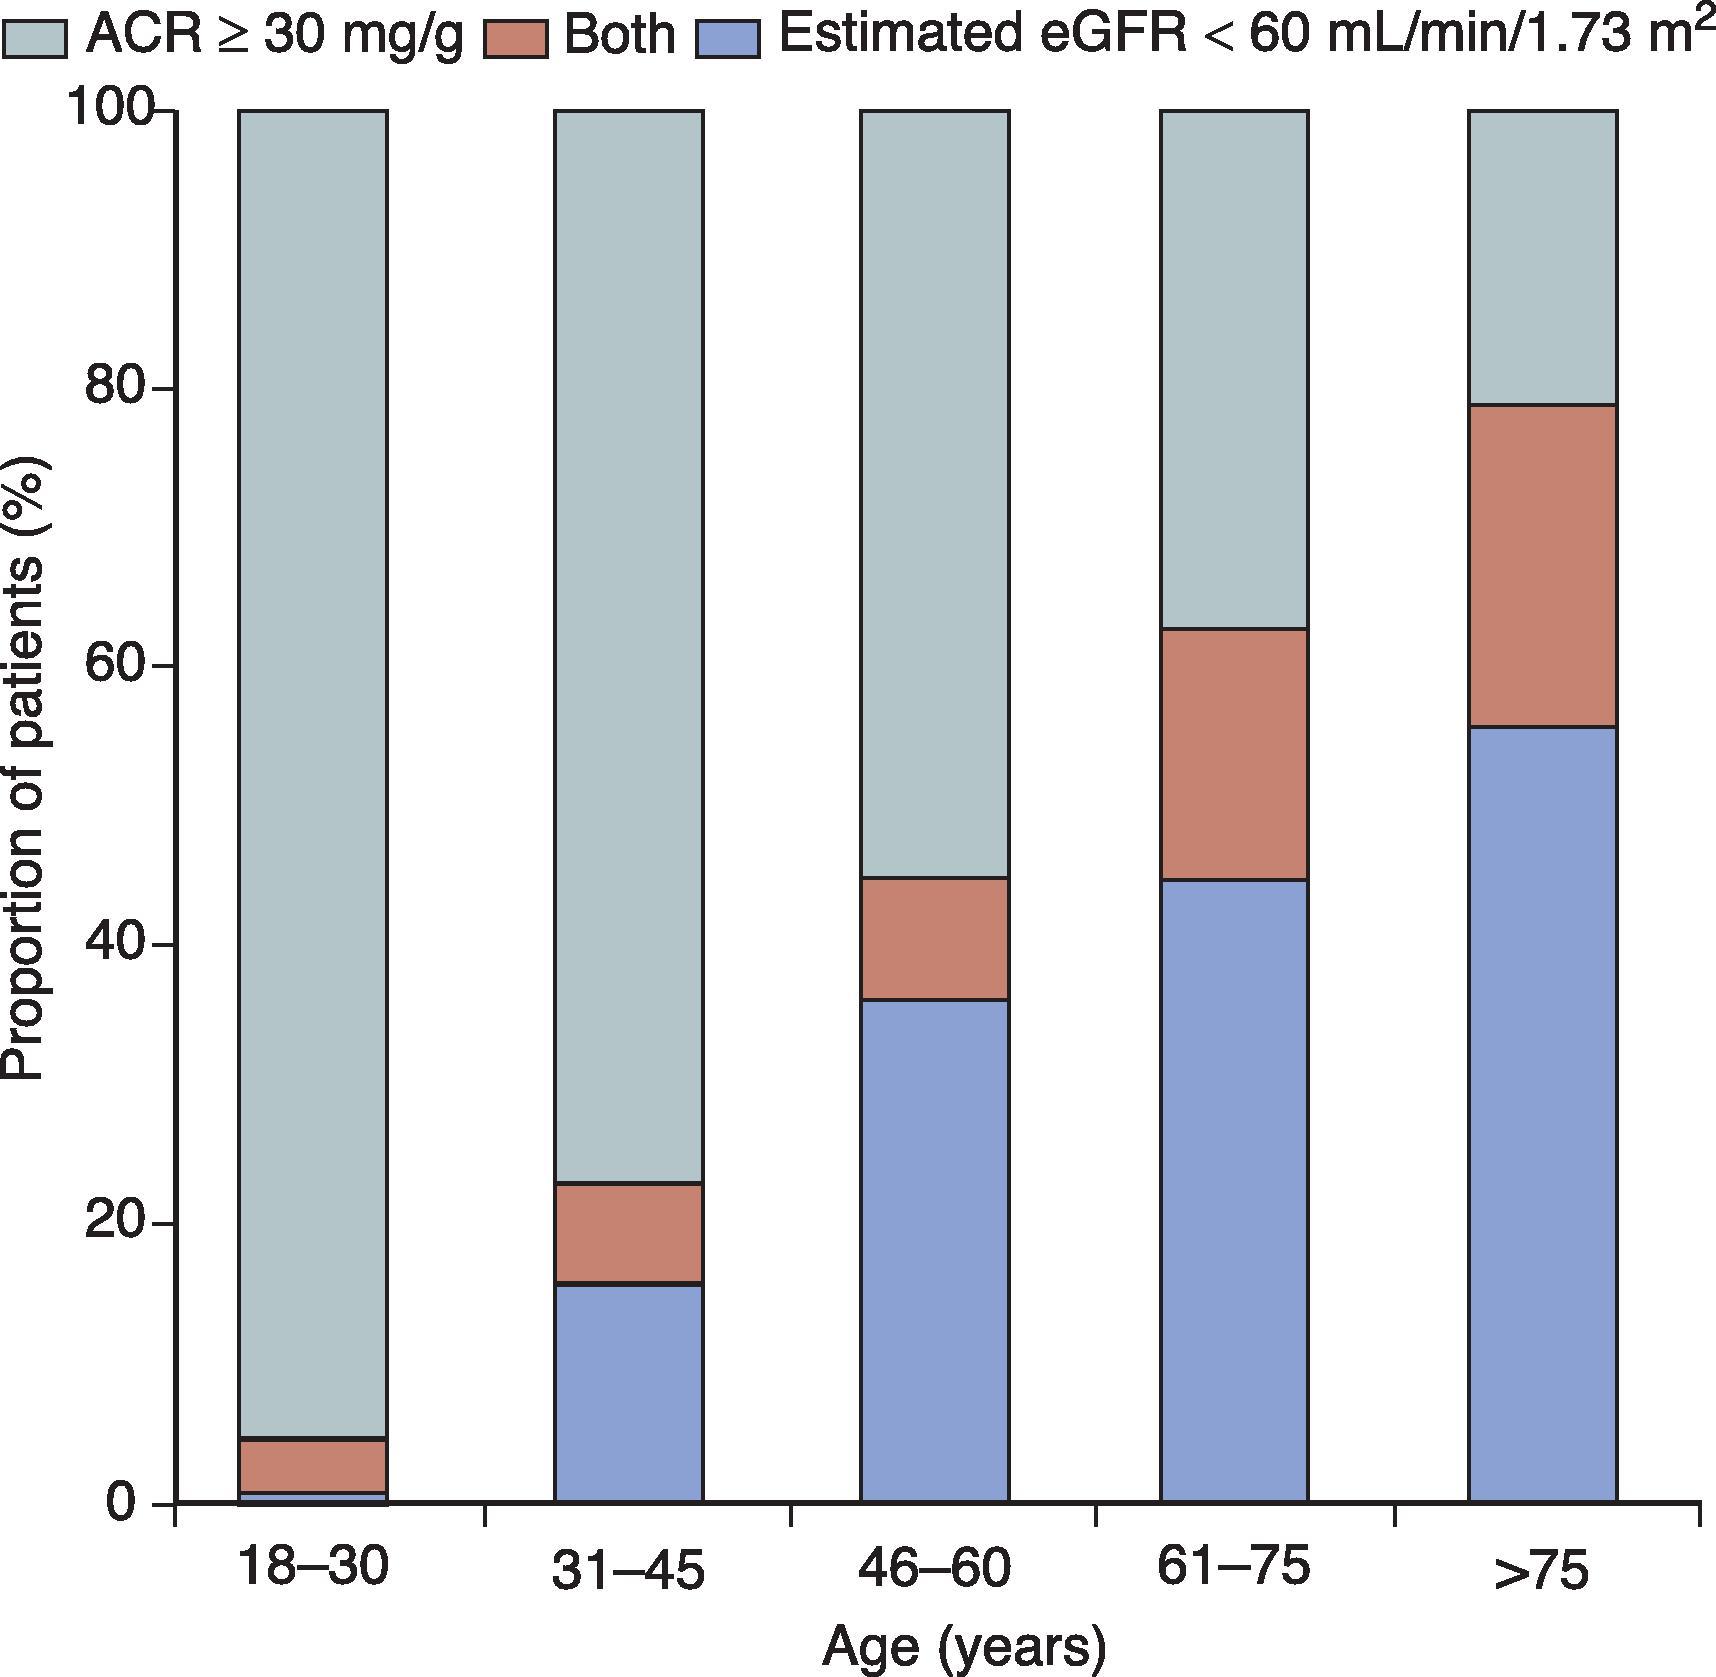 Fig. 48.2, Proportions of patients with chronic kidney disease identified by albumin-to-creatinine ratio (ACR), estimated glomerular filtration rate (eGFR), or both in the US population. (From James MT, Hemmelgarn BR, Tonelli M. Early recognition and prevention of chronic kidney disease. Lancet . 2010;375:1296–1309. Adapted from McCullough PA, Li S, Jurkovitz CT, et al. CKD and cardiovascular disease in screened high-risk volunteer and general populations: the Kidney Early Evaluation Program [KEEP] and National Health and Nutrition Examination Survey [NHANES] 1999–2004. Am J Kidney Dis . 2008;51:S38–S45.)